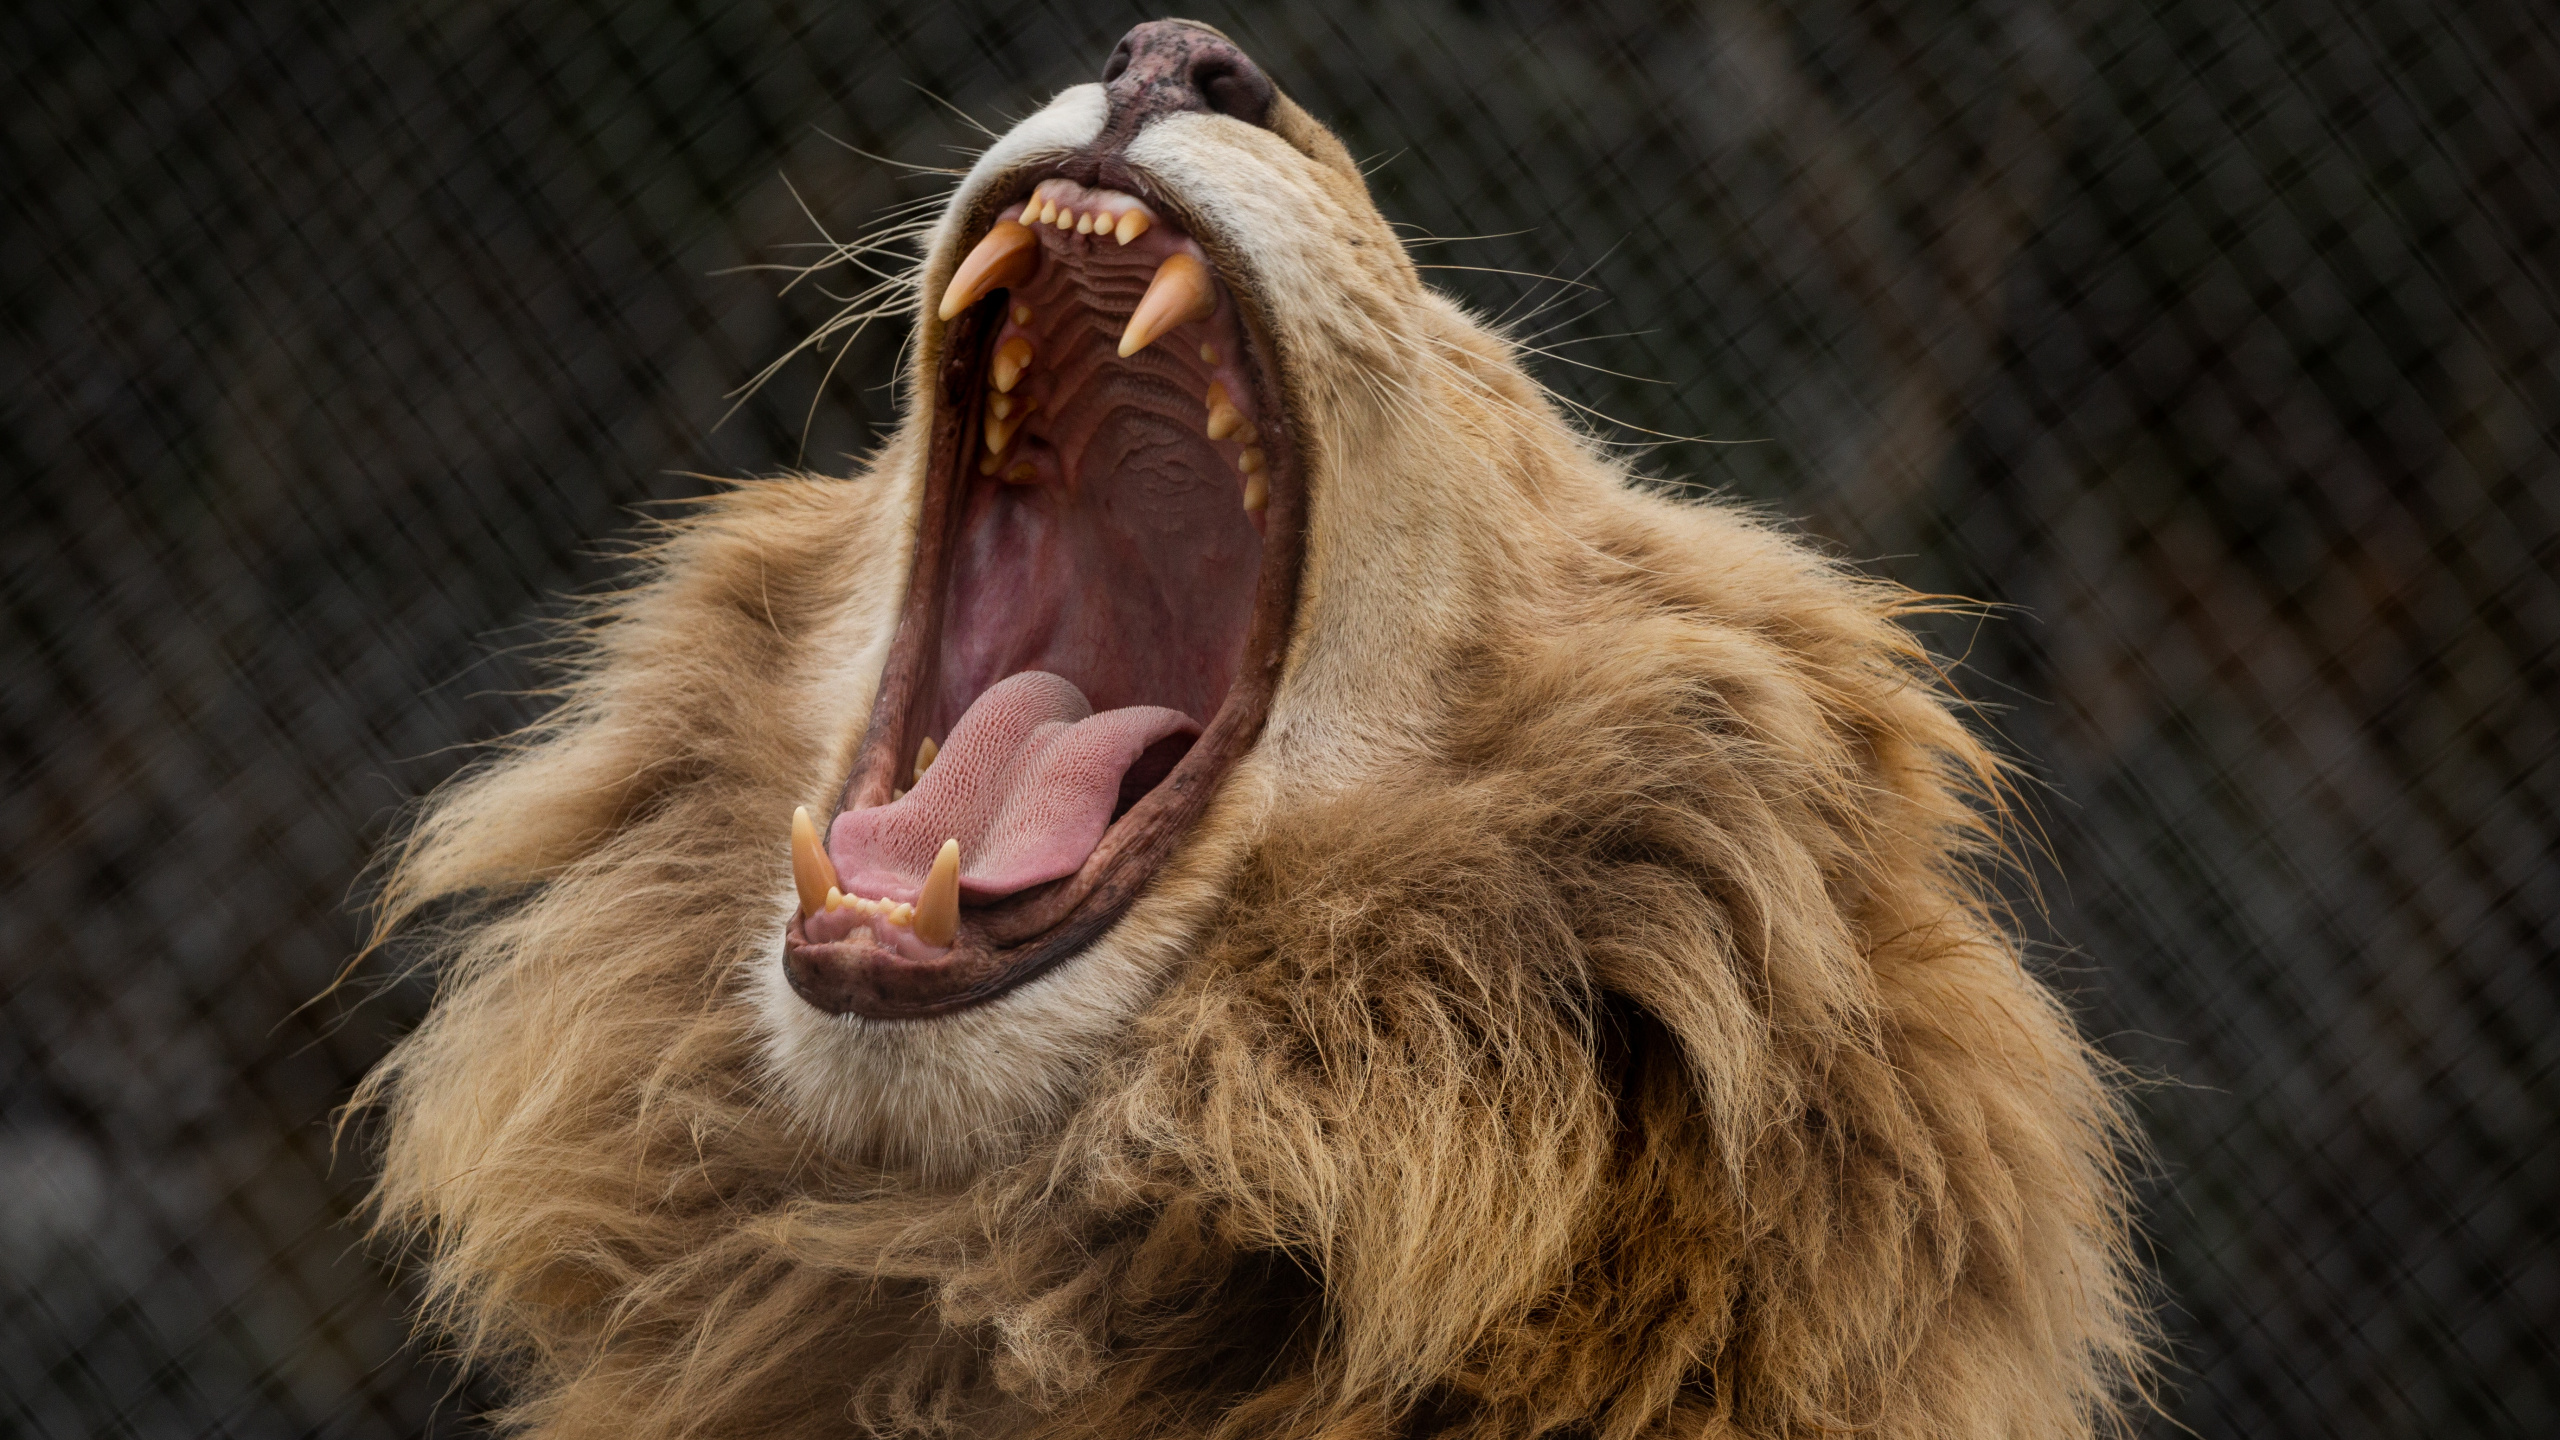 Brown Lion Showing Tongue During Daytime. Wallpaper in 2560x1440 Resolution